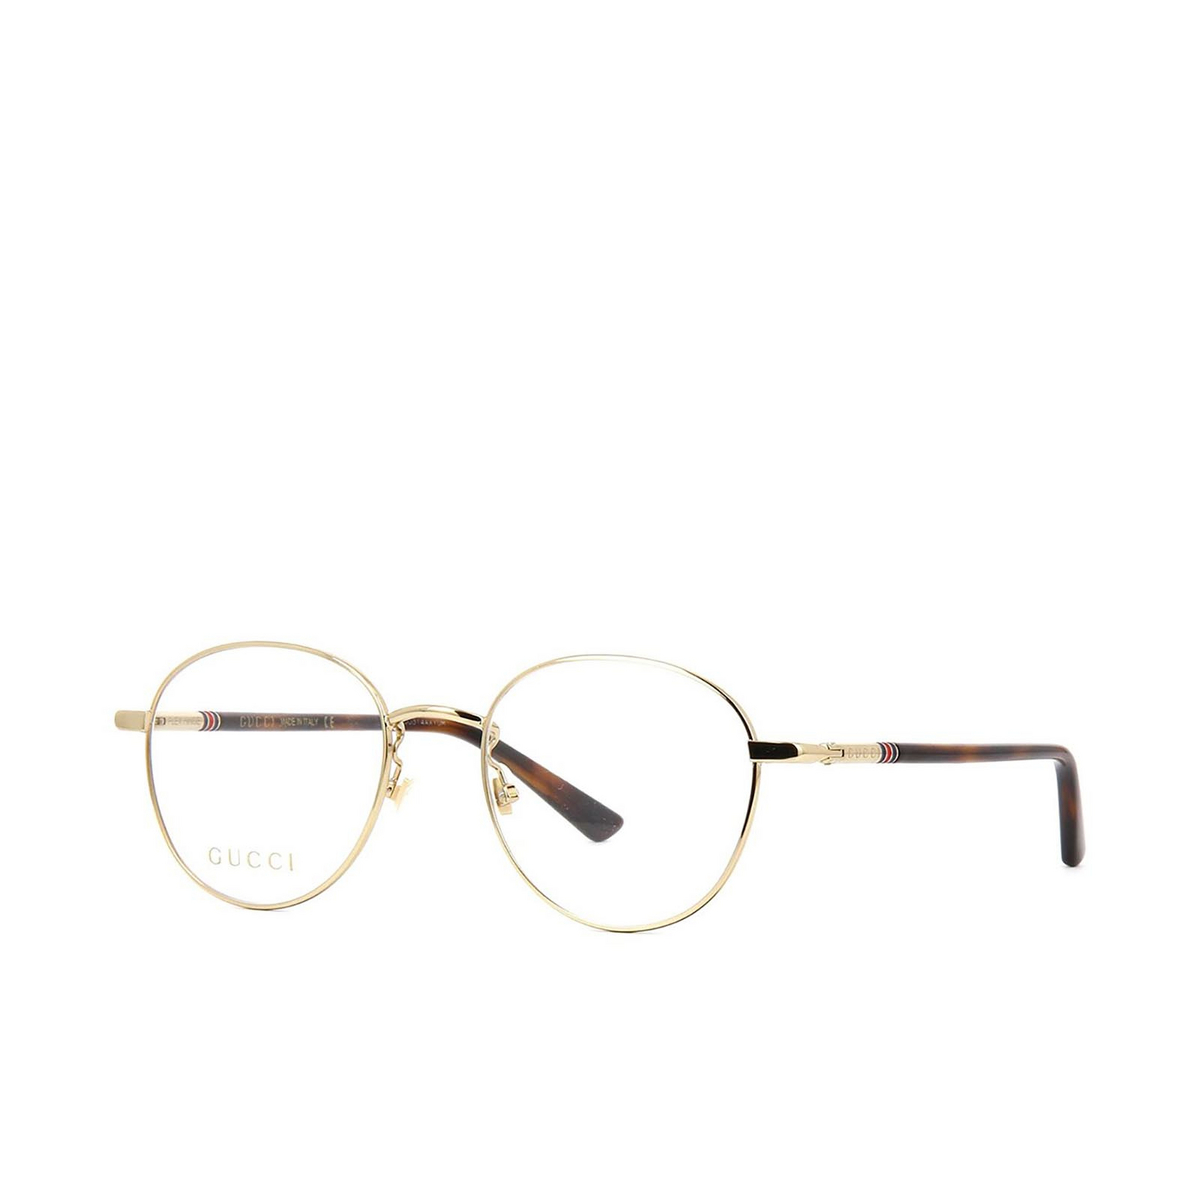 Gucci® Round Eyeglasses: GG0392O color Gold 003 - 2/2.